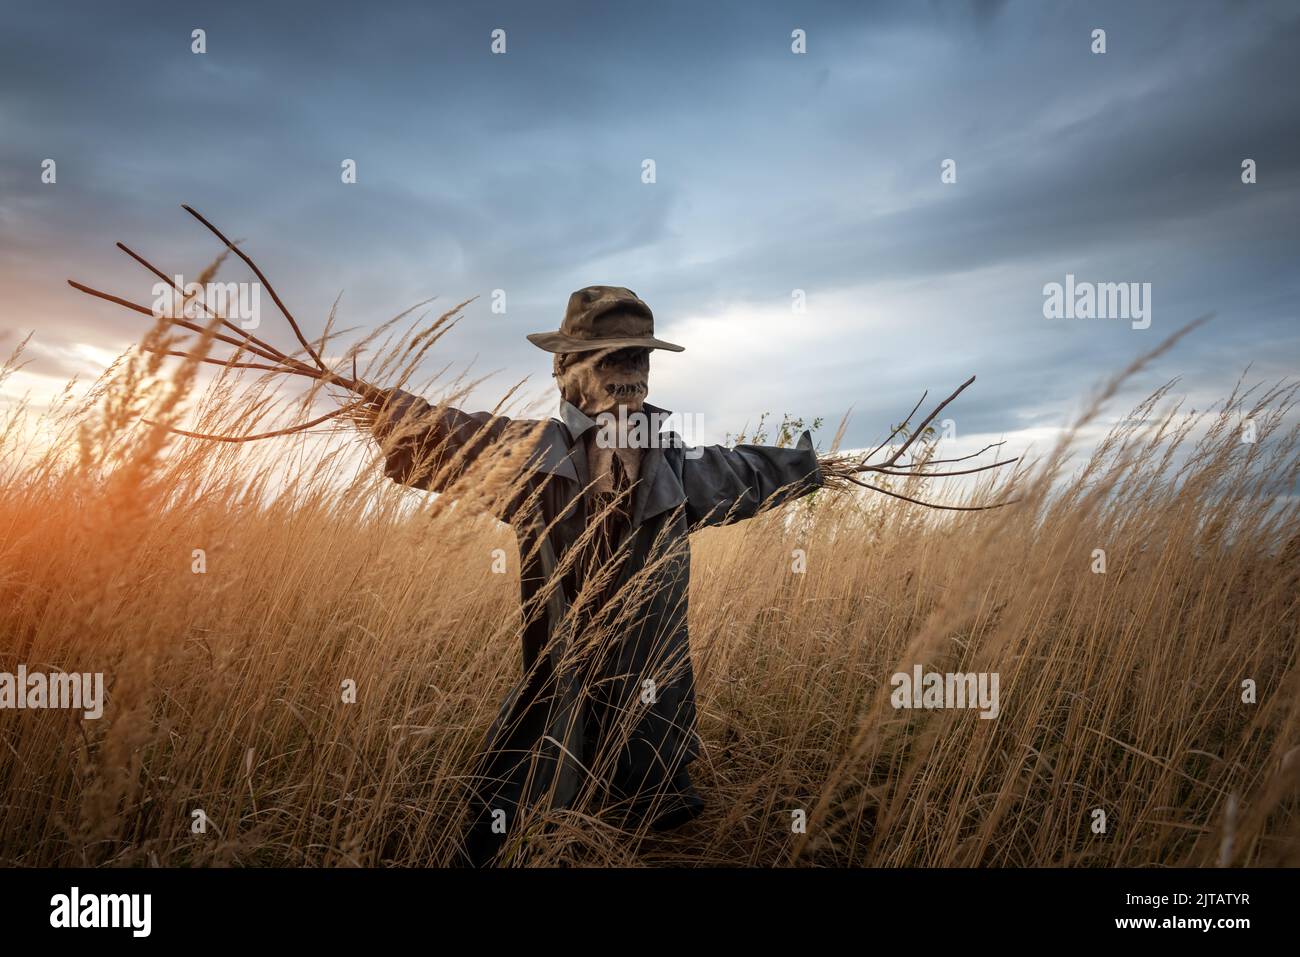 Scary scarecrow in a hat and coat on a evening autumn field during sunset. Spooky Halloween holiday concept. Halloweens background Stock Photo